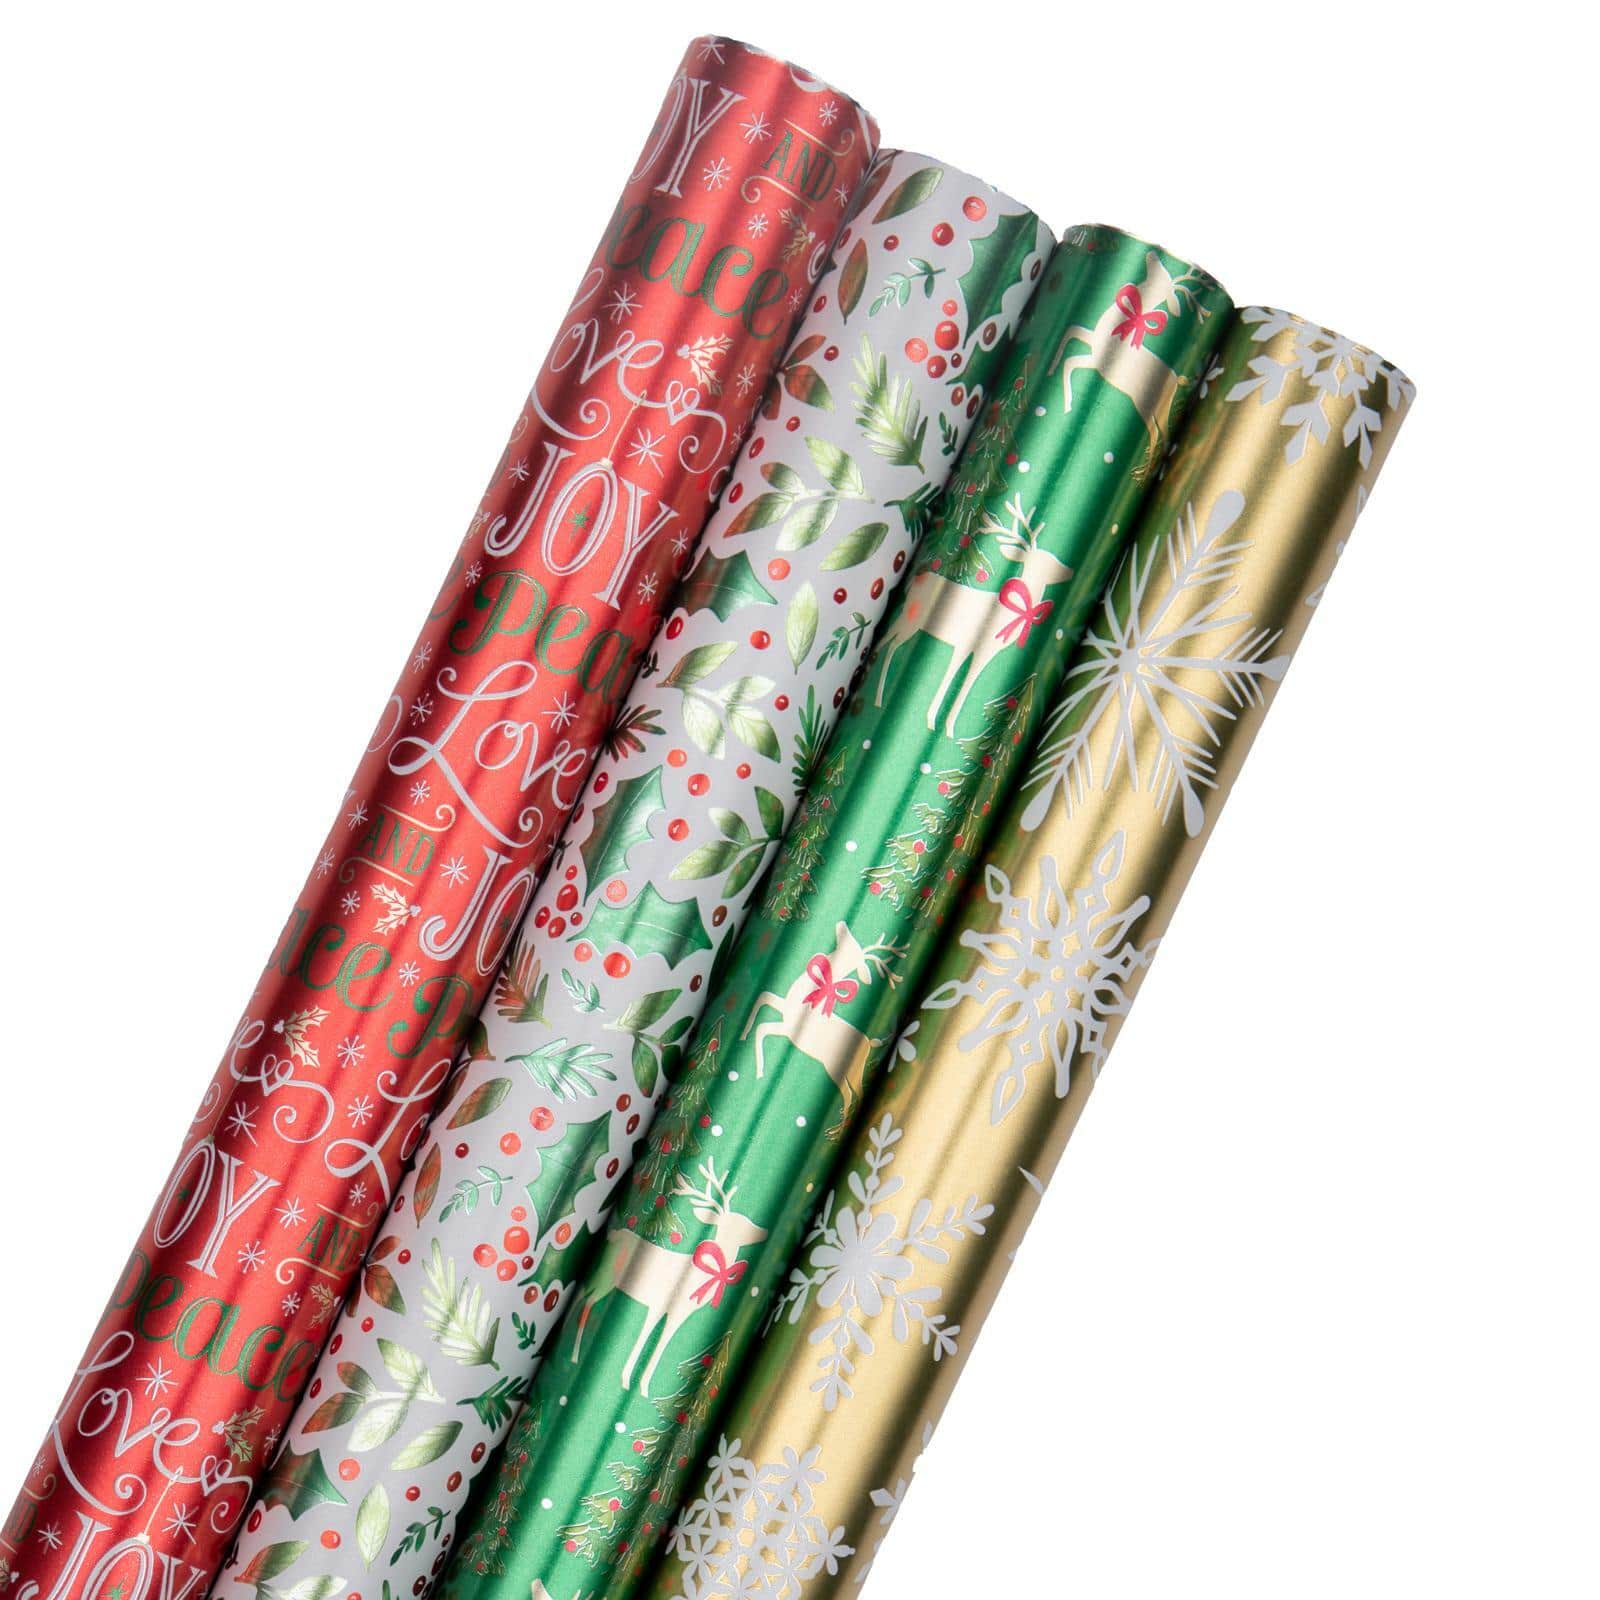 JAM Christmas Wrapping Paper, 25 Sq Ft, 1/Pack, Foil Snowflake Patterns  Gift Wrap 